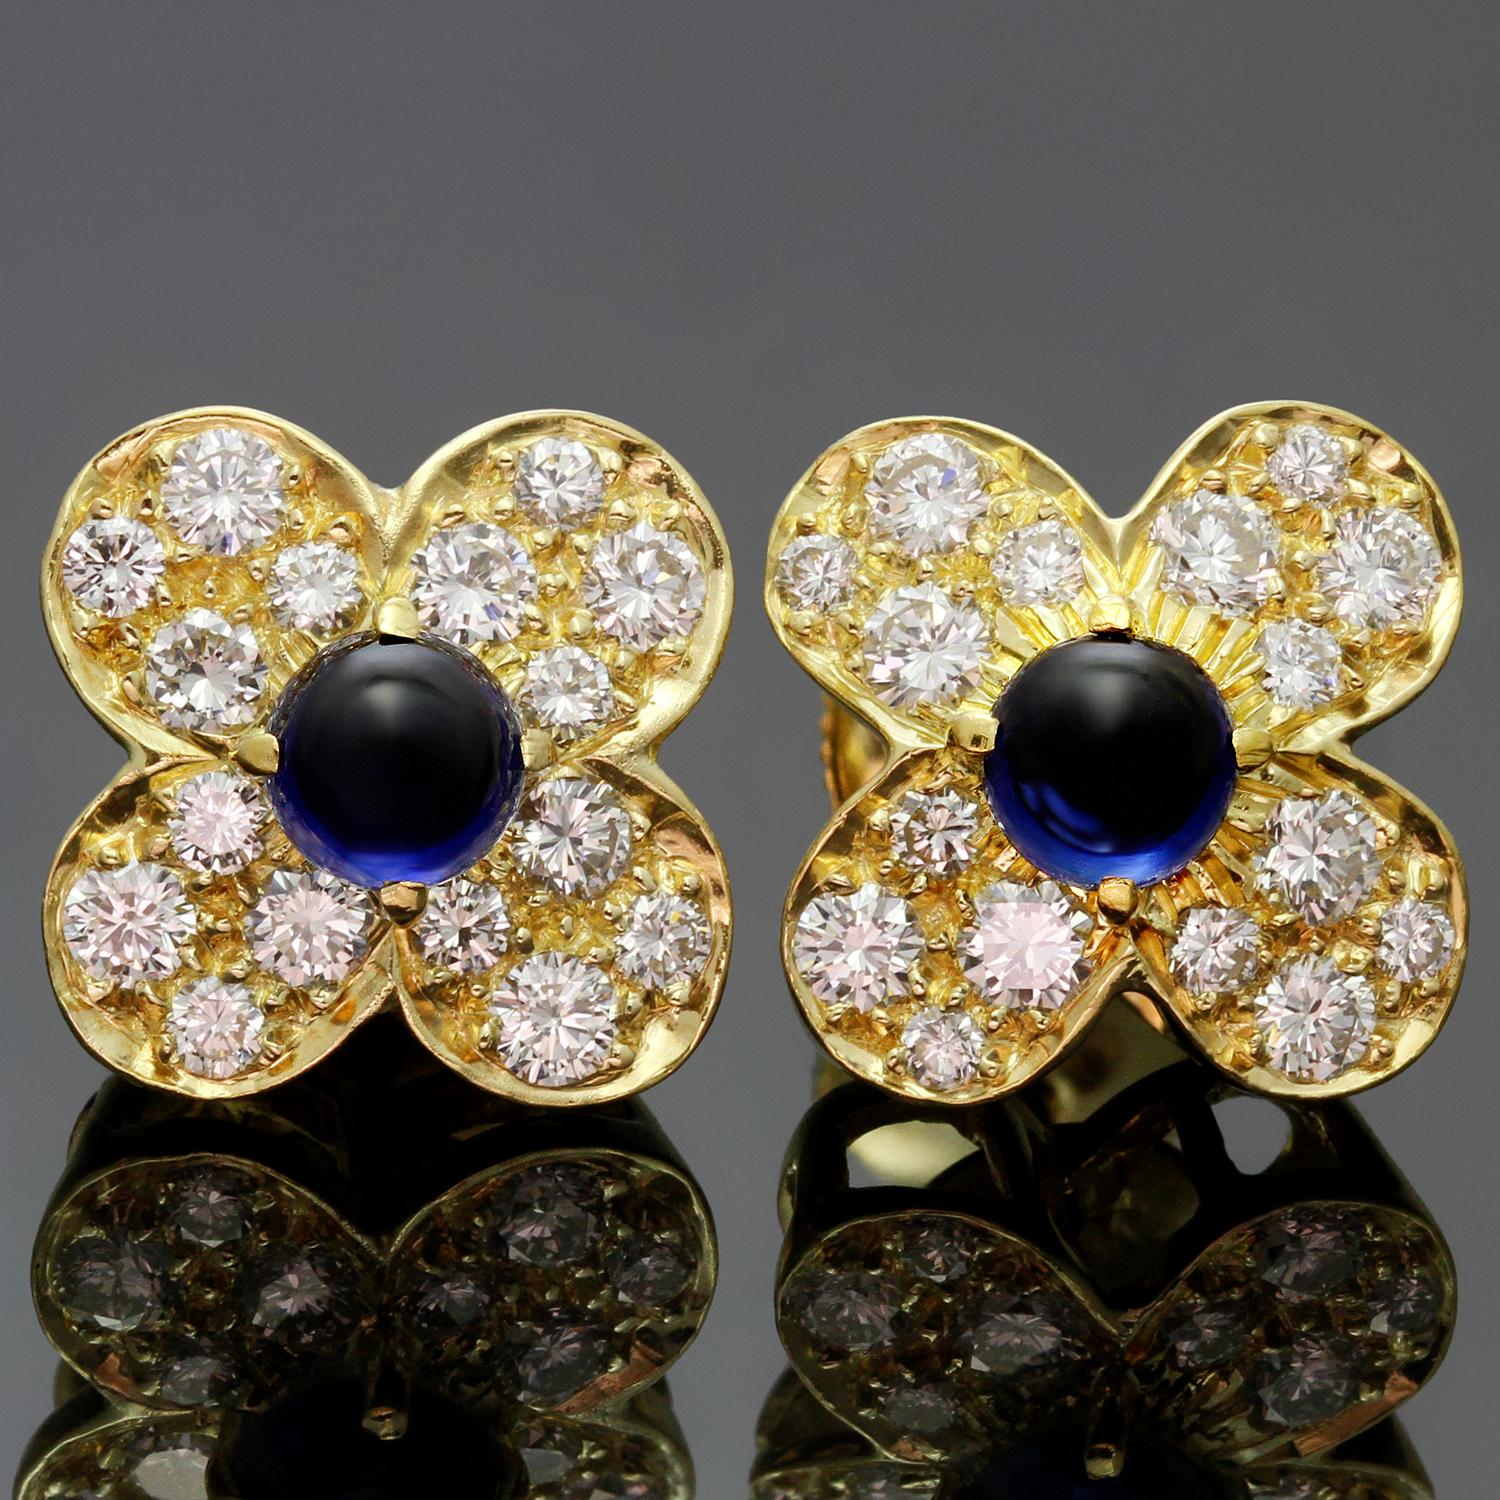 These gorgeous Van Cleefs & Arpels earrings from the classic Trefle collection are crafted in 18k yellow gold and feature 0.90 carats of superb quality brilliant-cut diamonds and 0.80 carats of lustrous blue cabochon sapphires. Earrings are in great